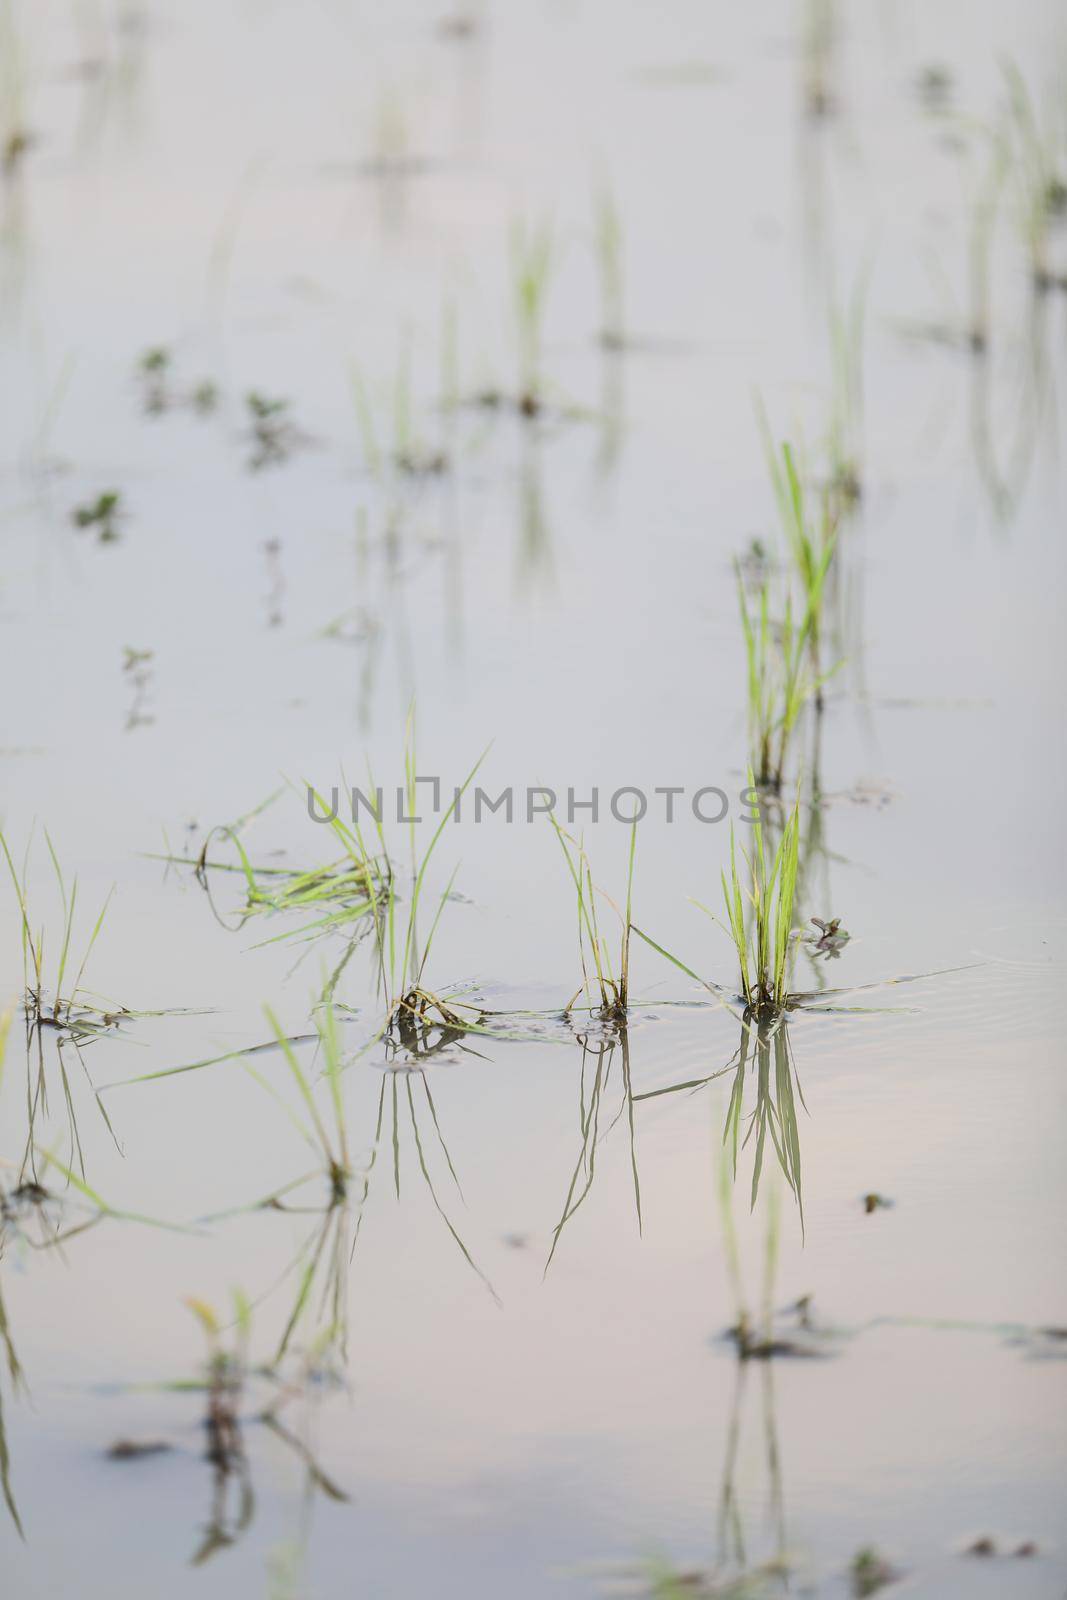 Green Head rice plant wheat on water